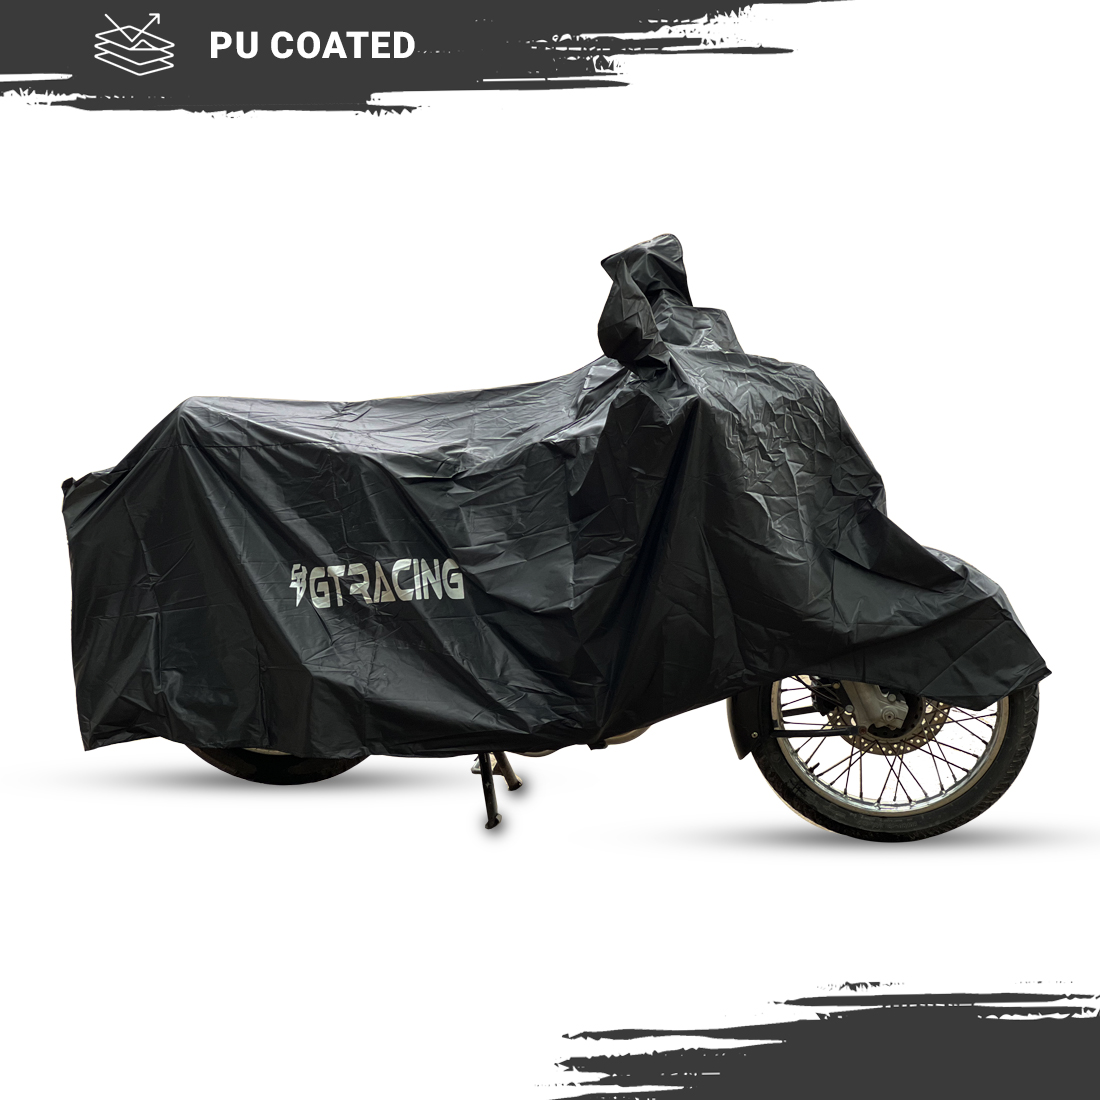 Steelbird 100% Waterproof Bike Cover GT Racing UV Protection Water-Resistant & Dustproof (Black PVC), Bike Body Cover With Carry Bag (All Bikes Upto Pulsar 180cc Size)